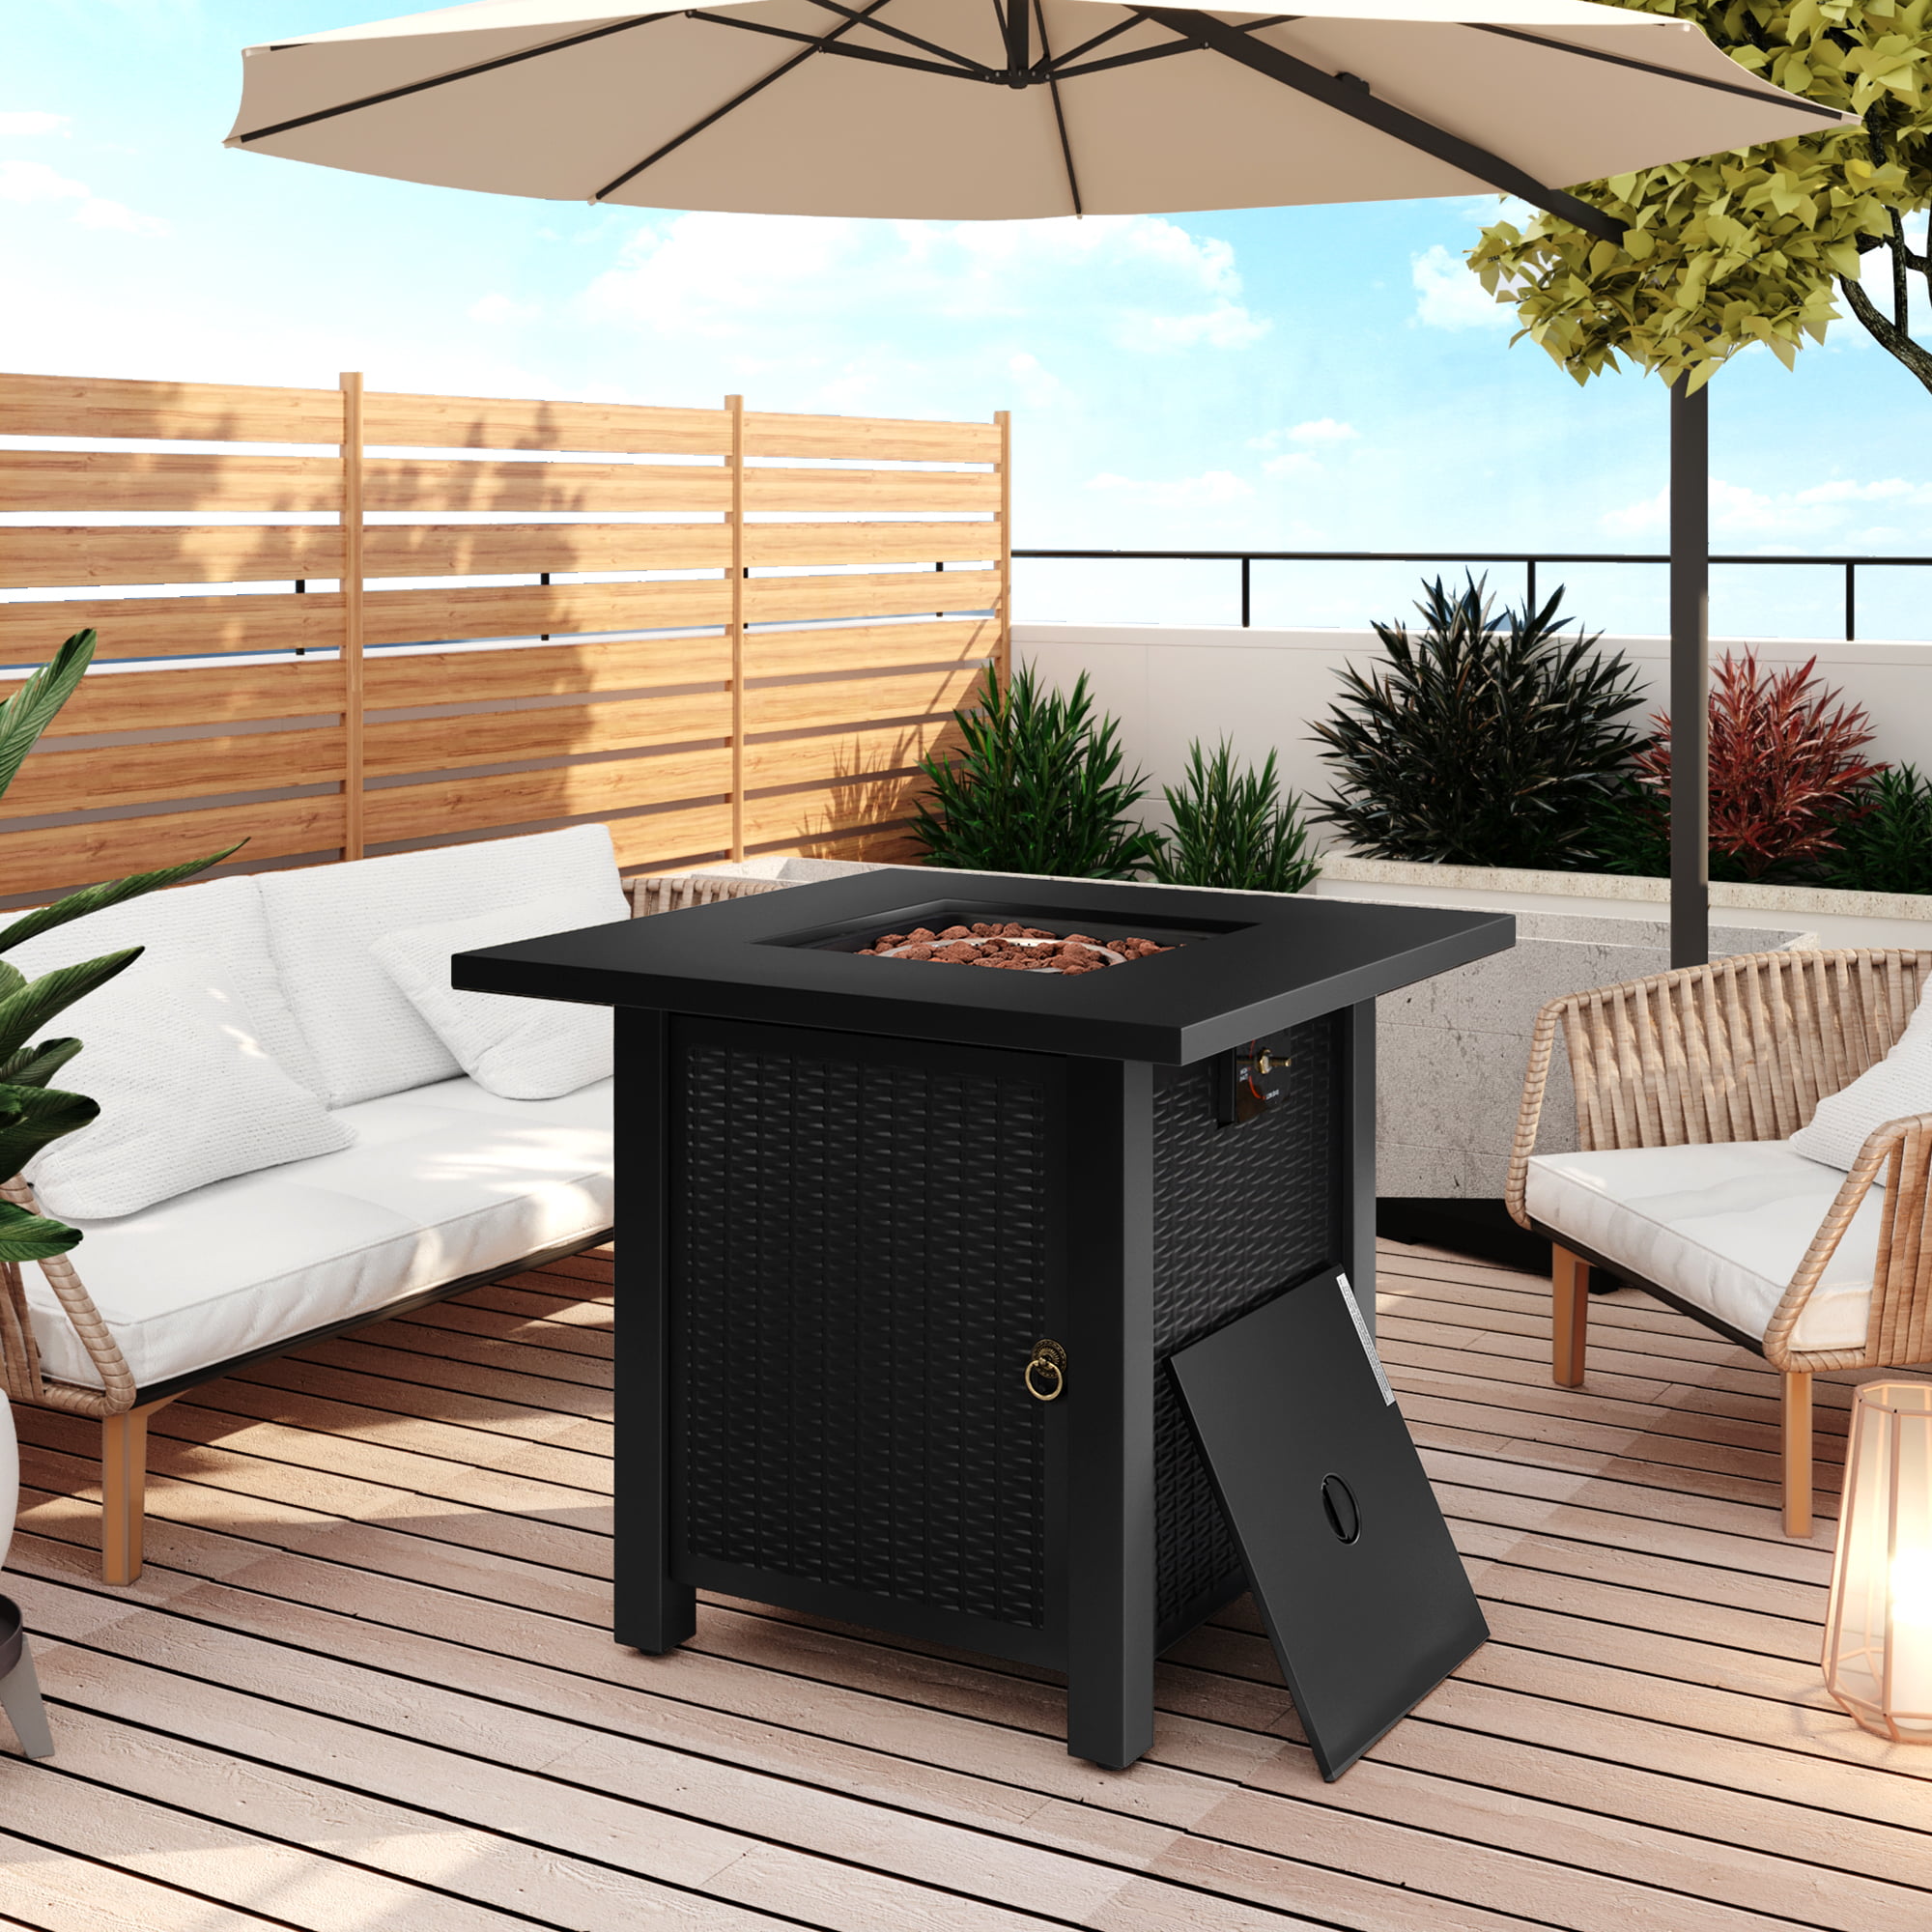 Outdoor Gas Fire Pit For Deck 40 000, Deck Fire Pit Table